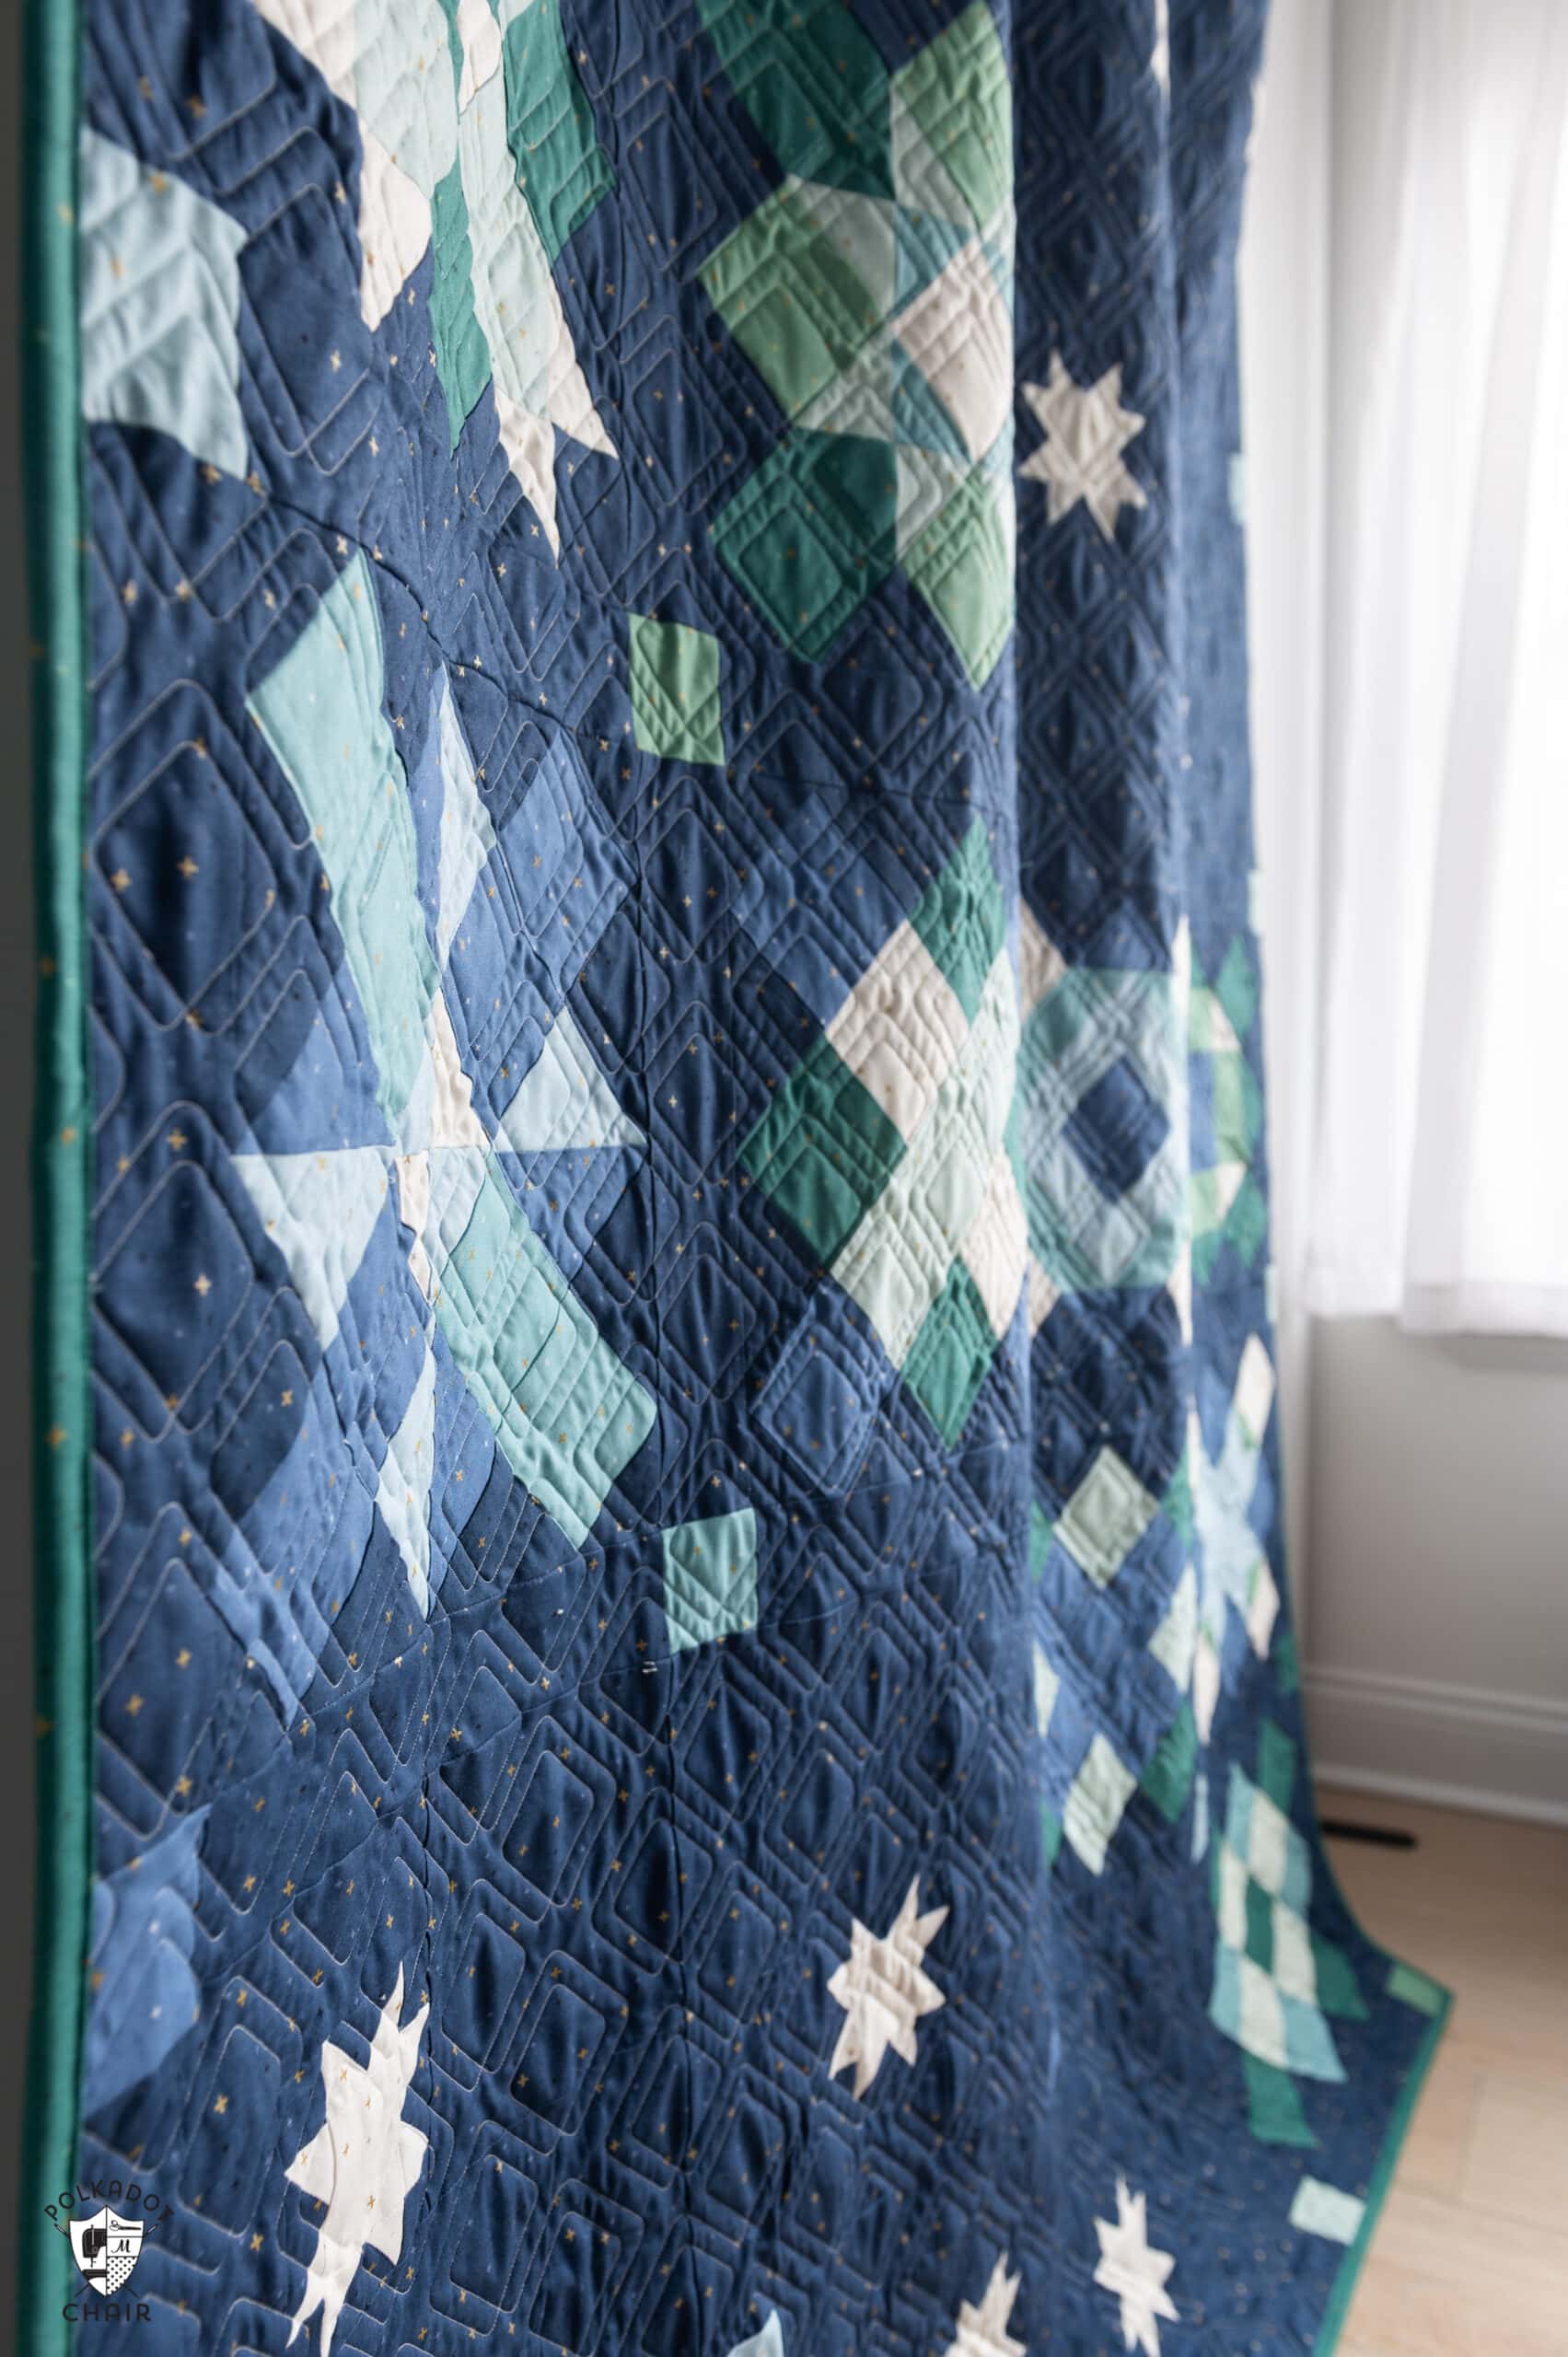 side view of navy, blue and green quilt made from squares and rectangles - a modern granny square quilt pattern